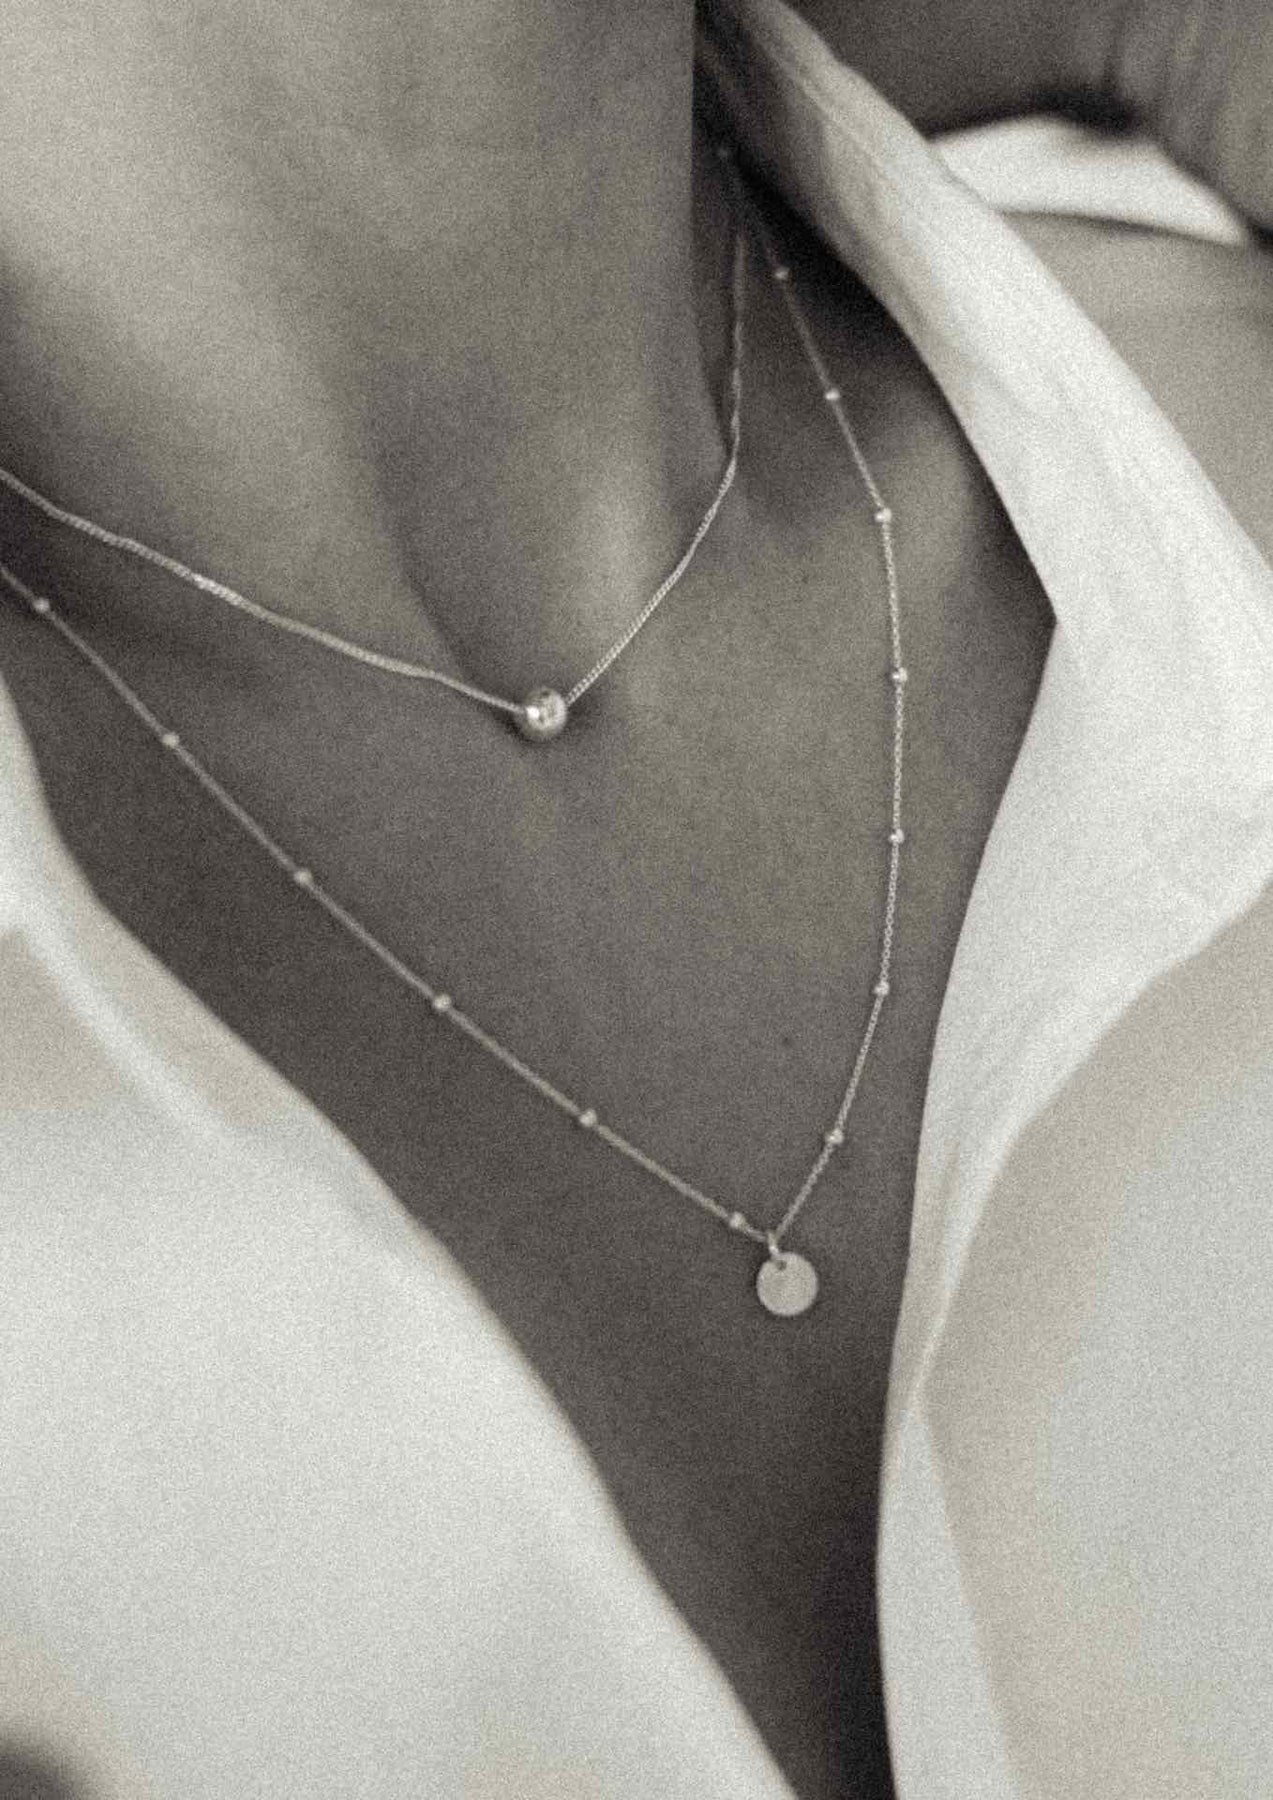 A woman wearing the Bubble Necklace - Gold, a sterling silver piece with 24kt gold plating bubble. Handmade sustainably in Lithuania, 40 cm chain length, 6 mm hollow bubble.